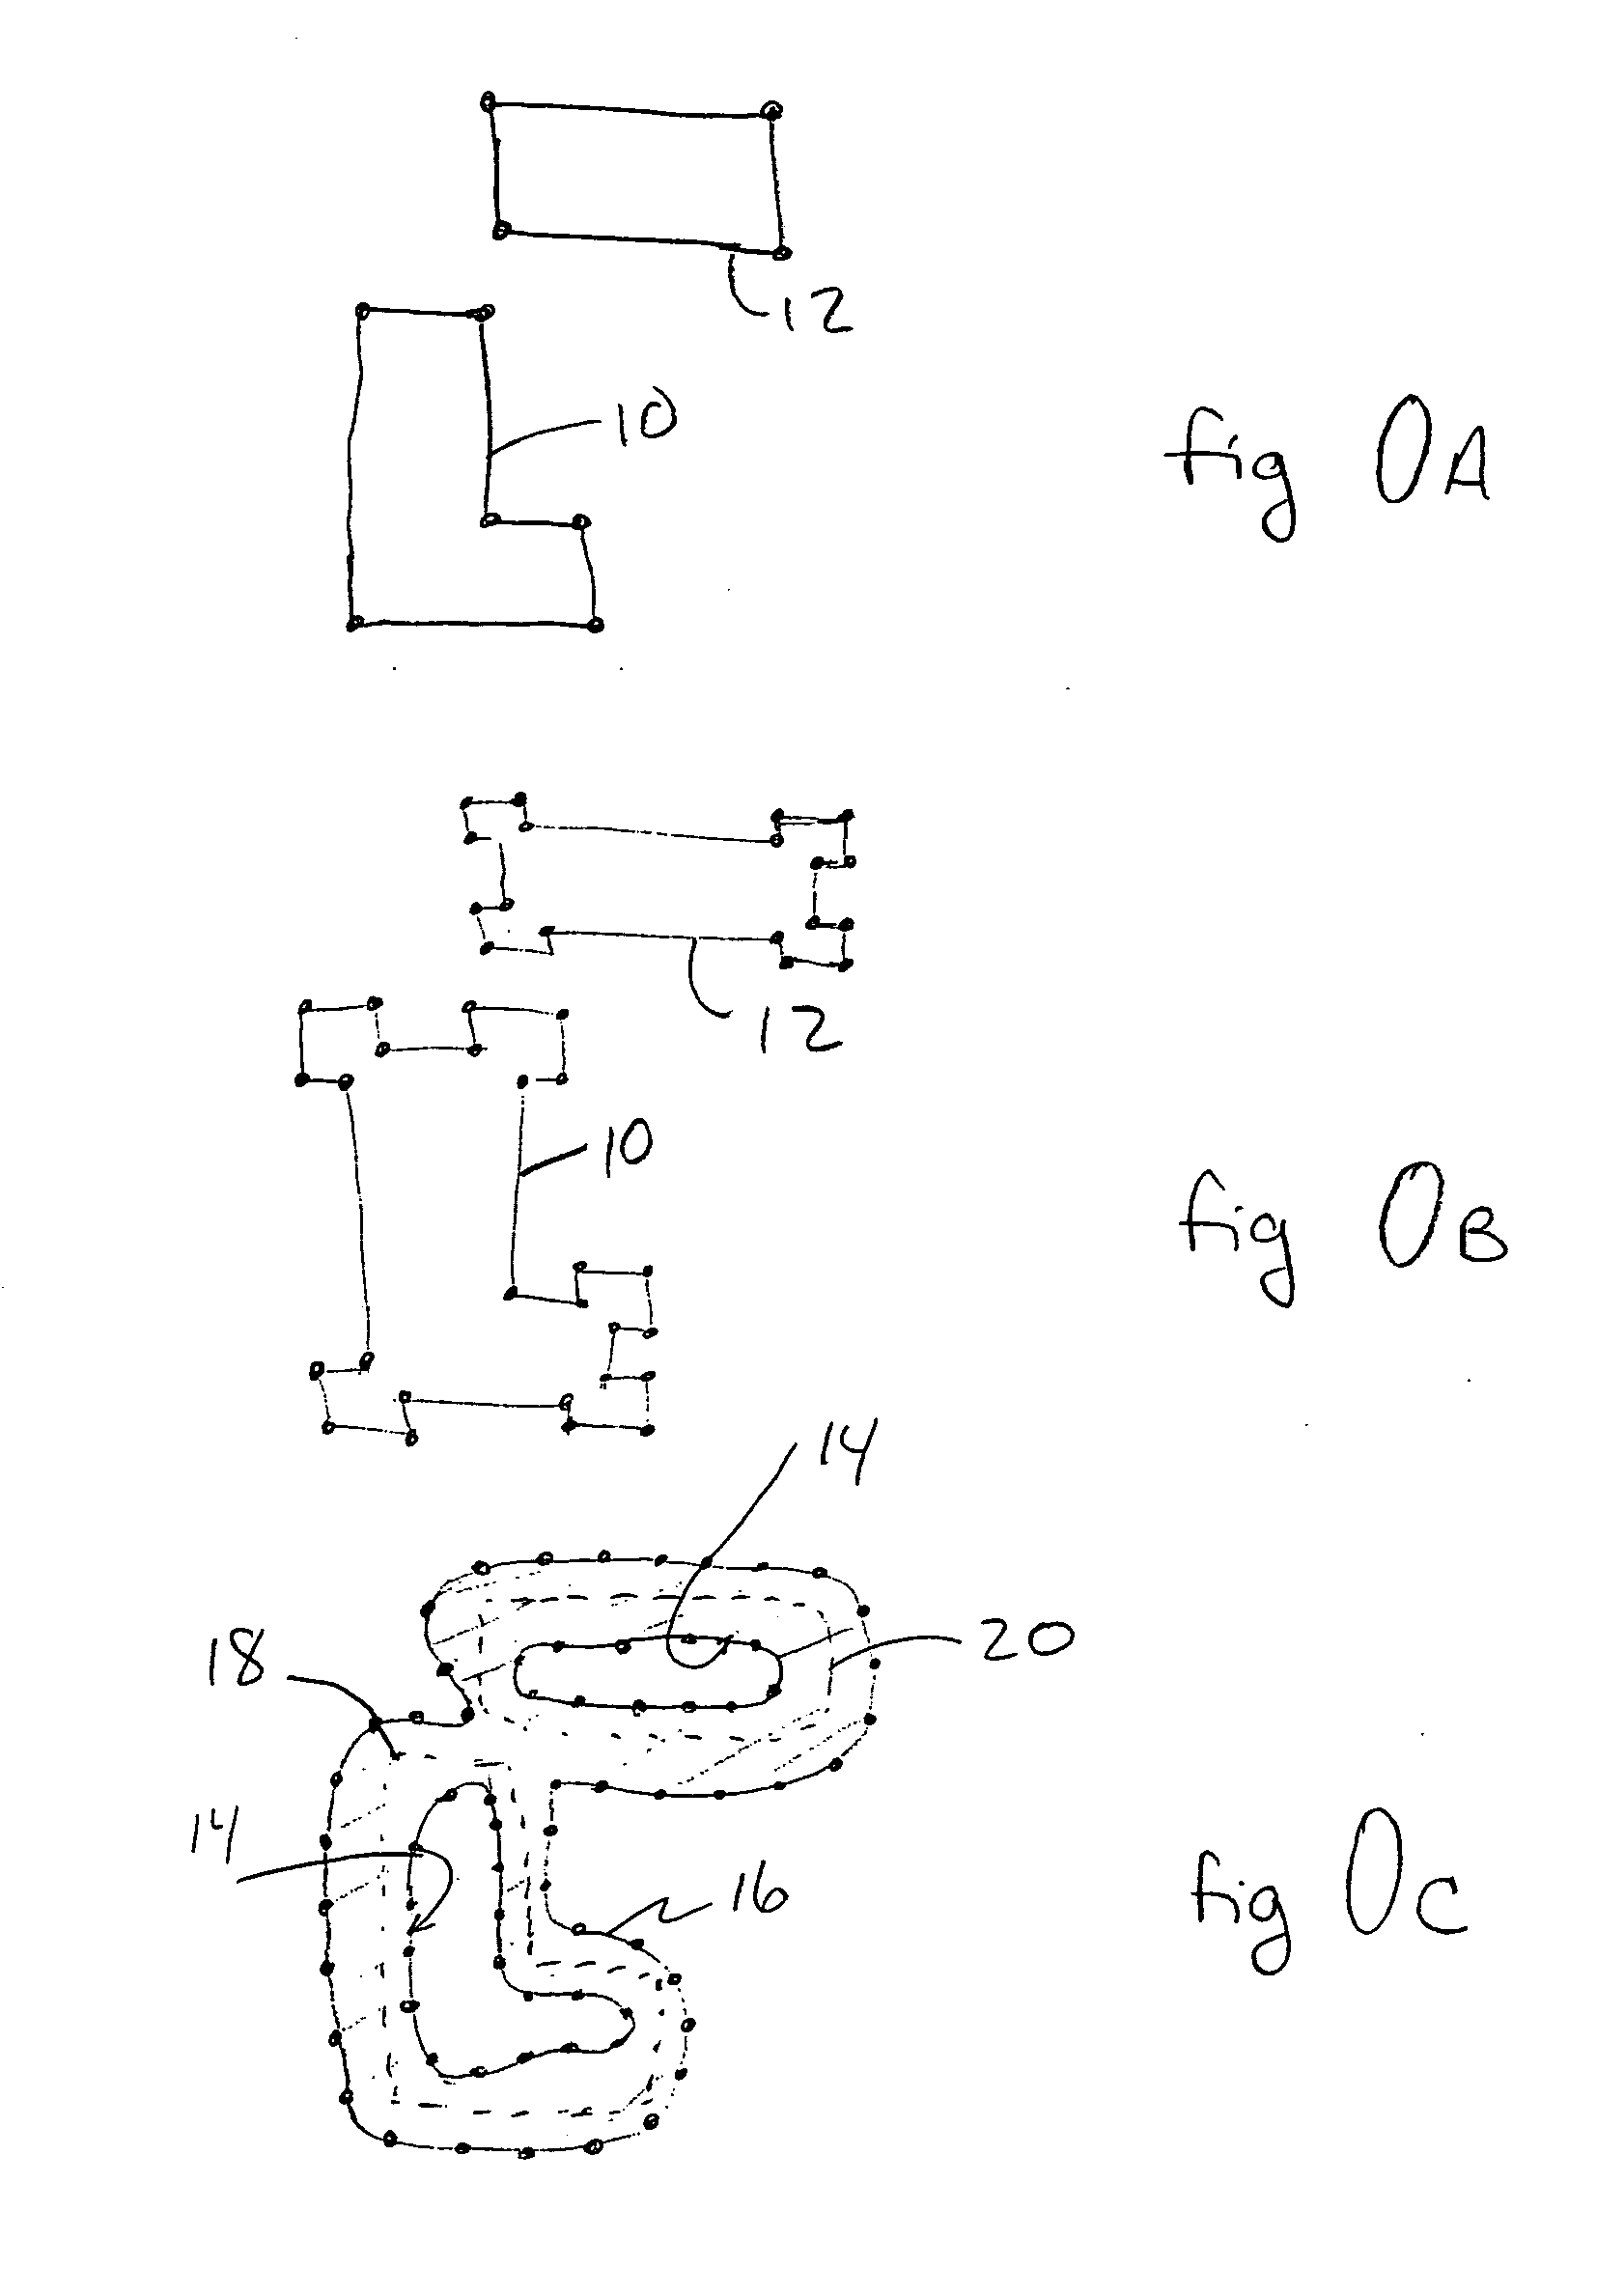 Integrated circuit layout design methodology with process variation bands